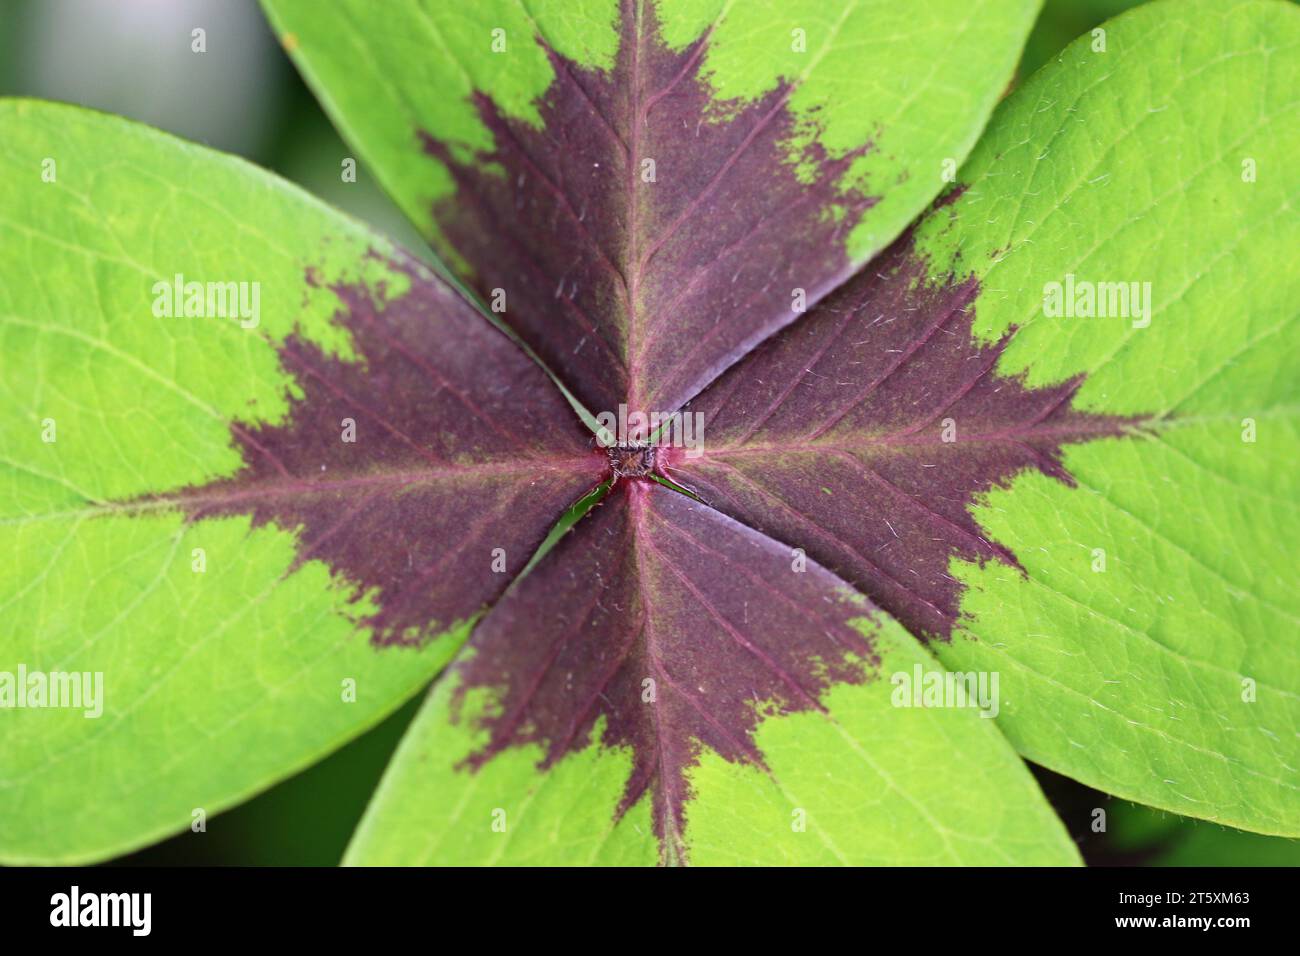 Variegated green and dark purple four leaf lucky clover, Oxalis tetraphylla, leaf in close up with a background of blurred leaves. Stock Photo